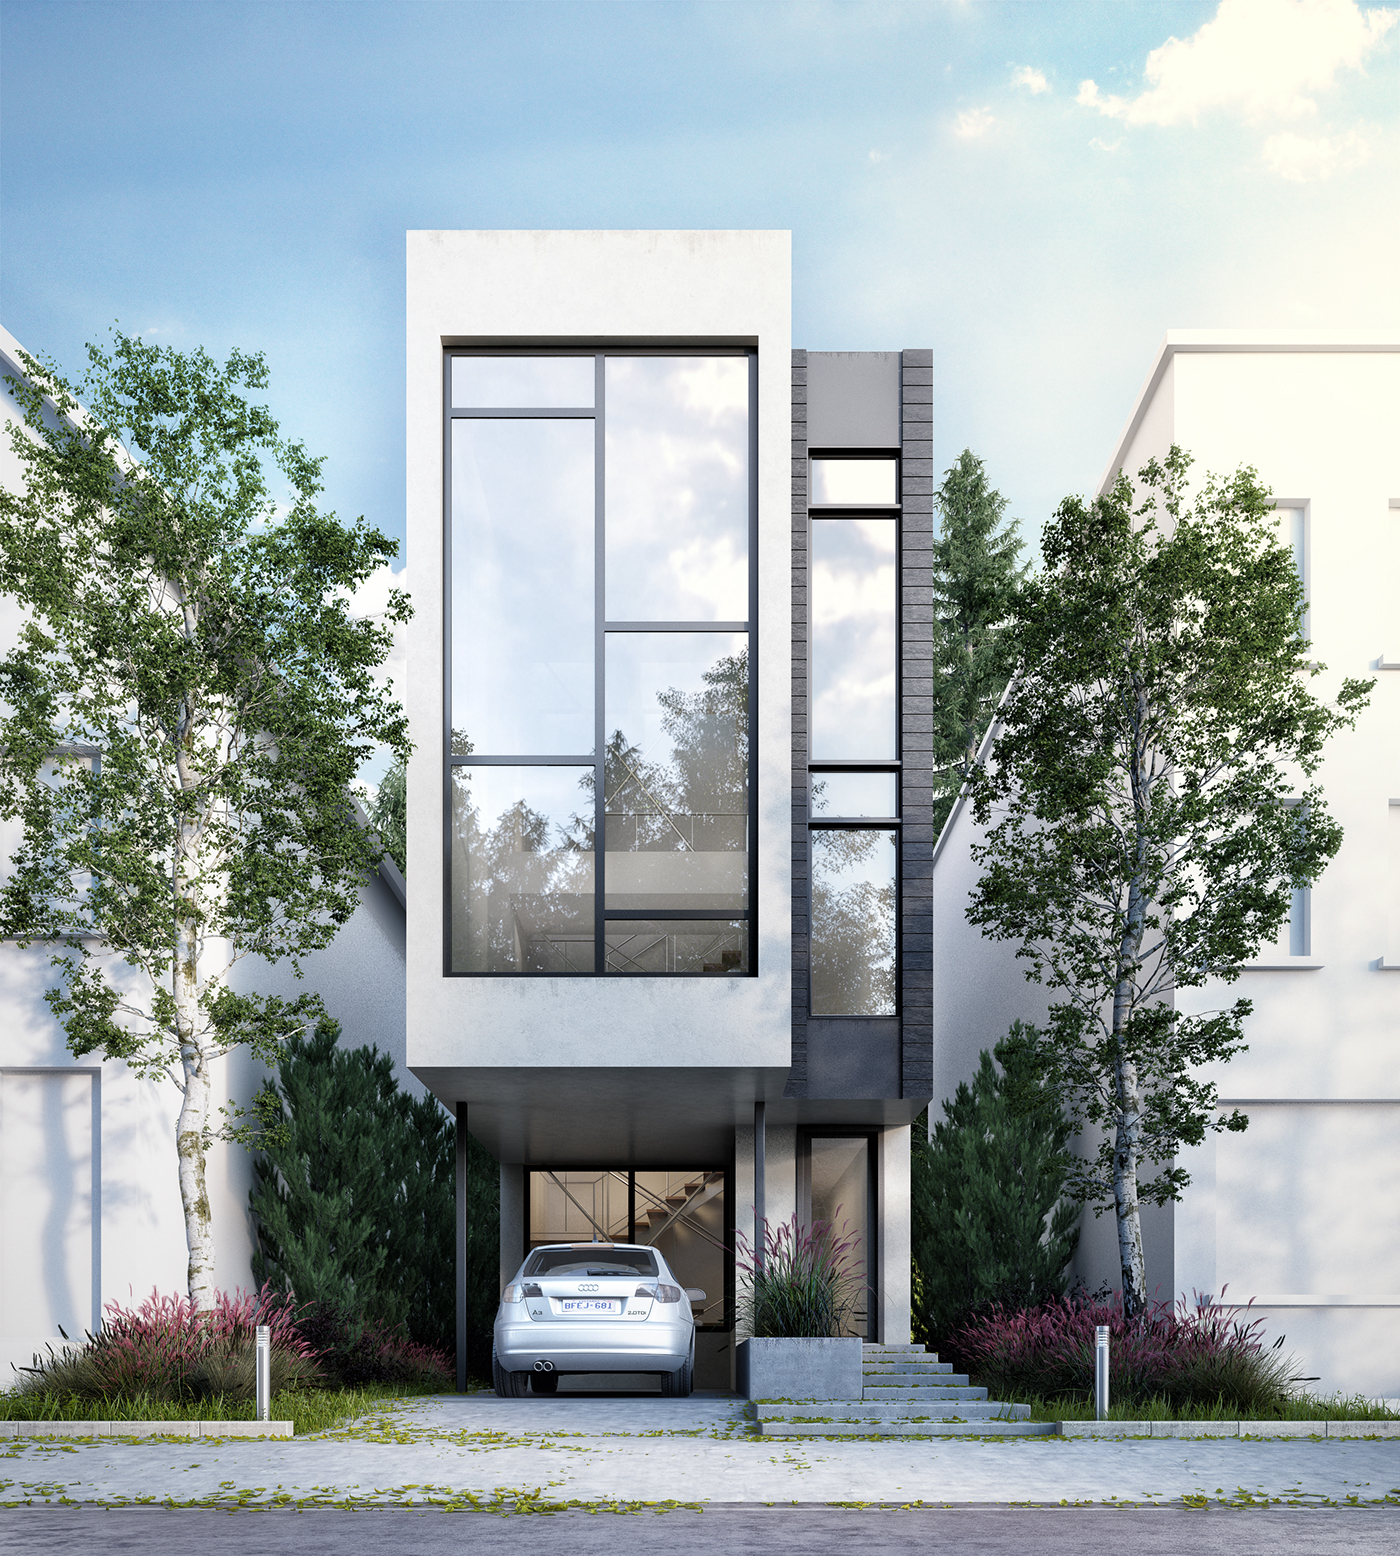 exteriors country modern Urban bone structure 3dsmax vray photoshop rendering